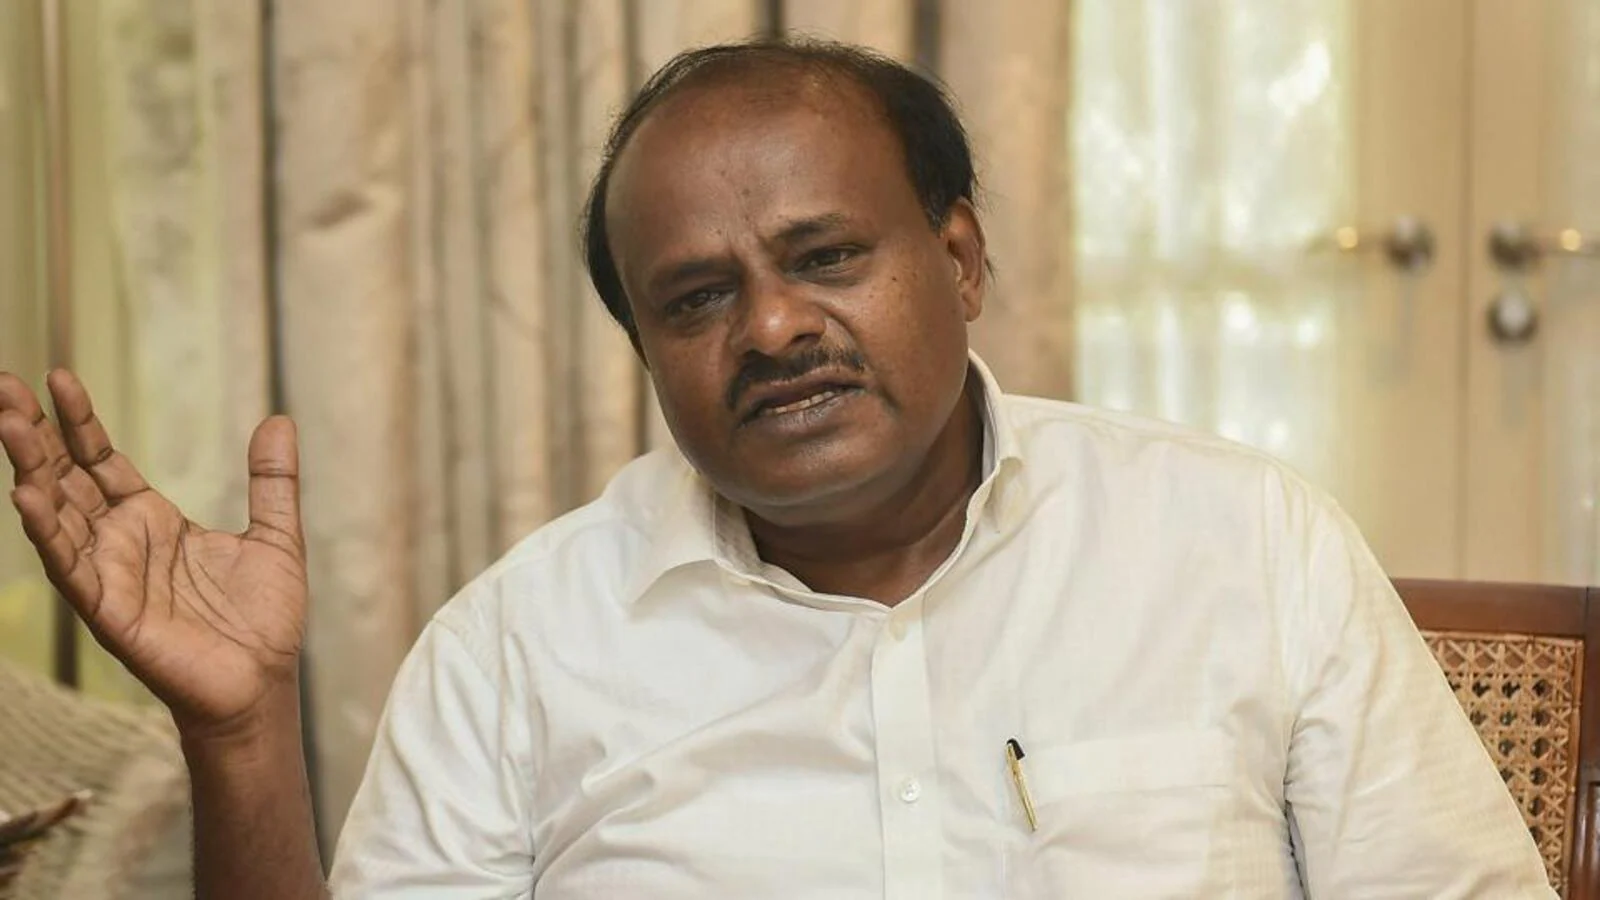 HDK targets BJP over communal clashes in the state